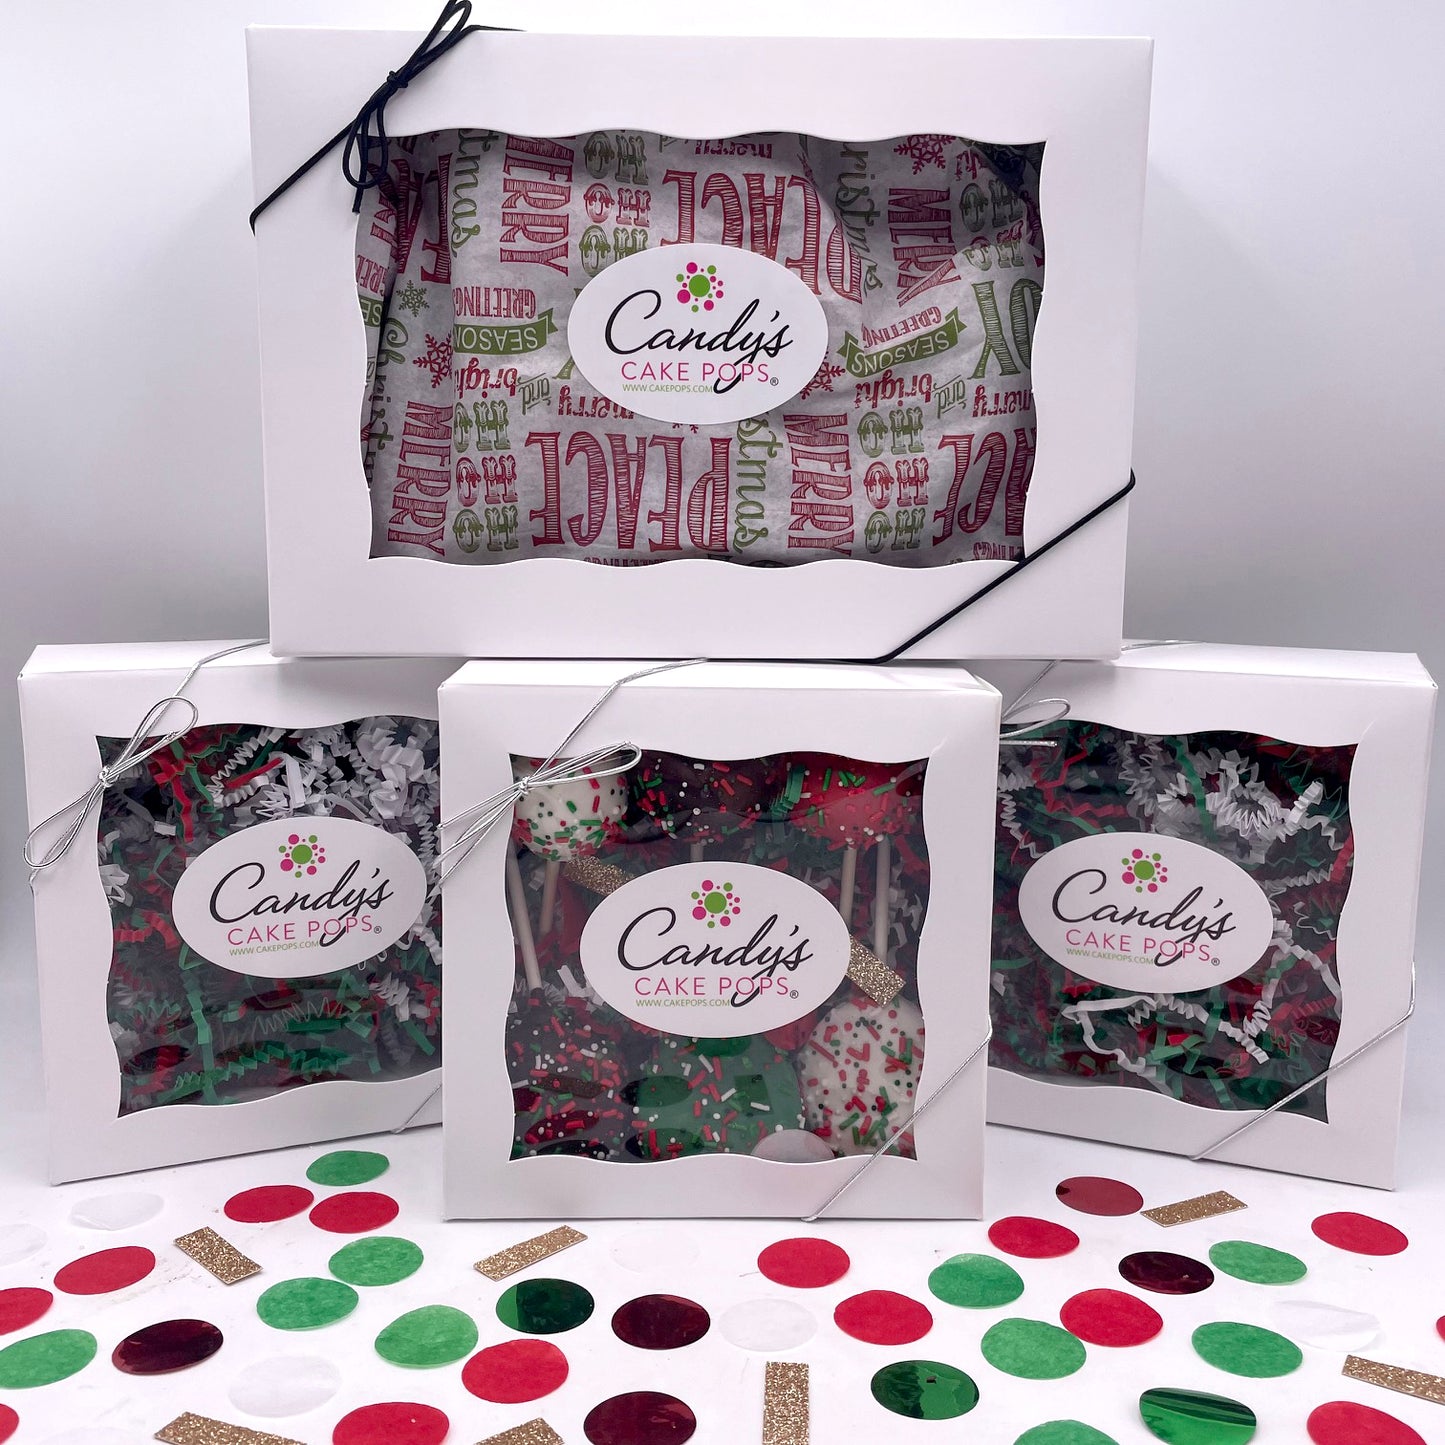 Merry Christmas Cake Pop Gift Box - Candy's Cake Pops